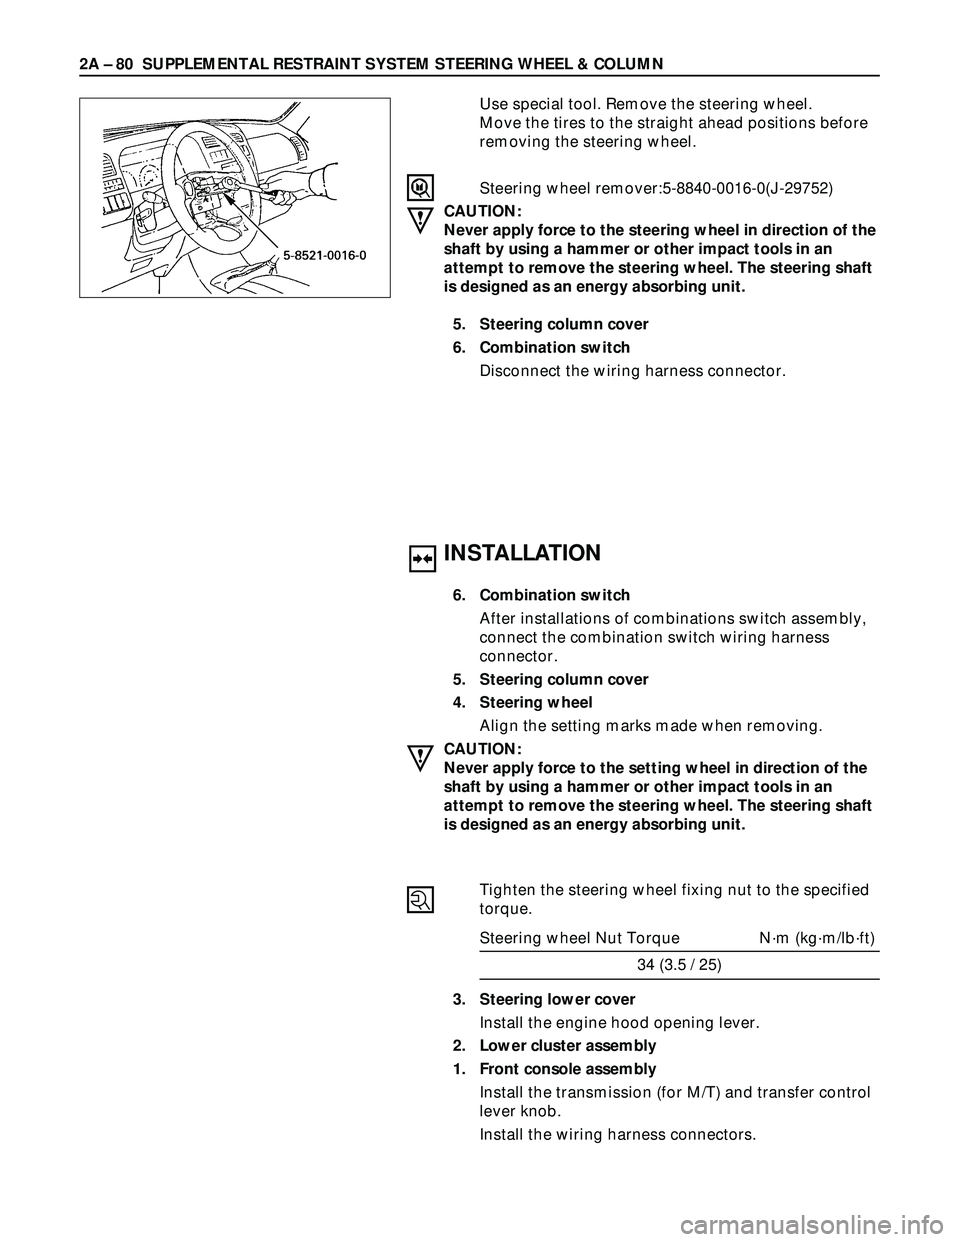 ISUZU TROOPER 1998  Service Repair Manual 2A – 80 SUPPLEMENTAL RESTRAINT SYSTEM STEERING WHEEL & COLUMN
INSTALLATION
6. Combination switch
After installations of combinations switch assembly,
connect the combination switch wiring harness
co